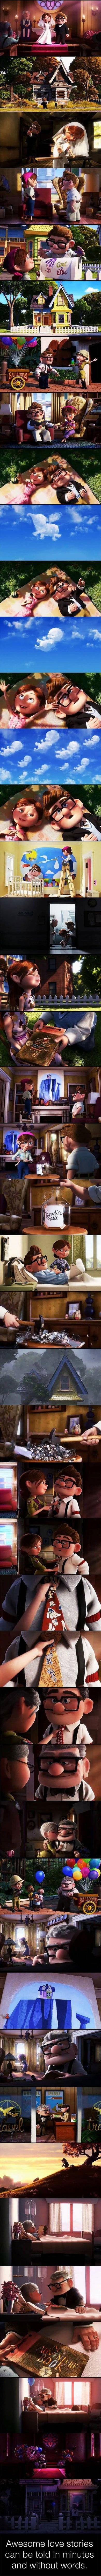 Best love story ever